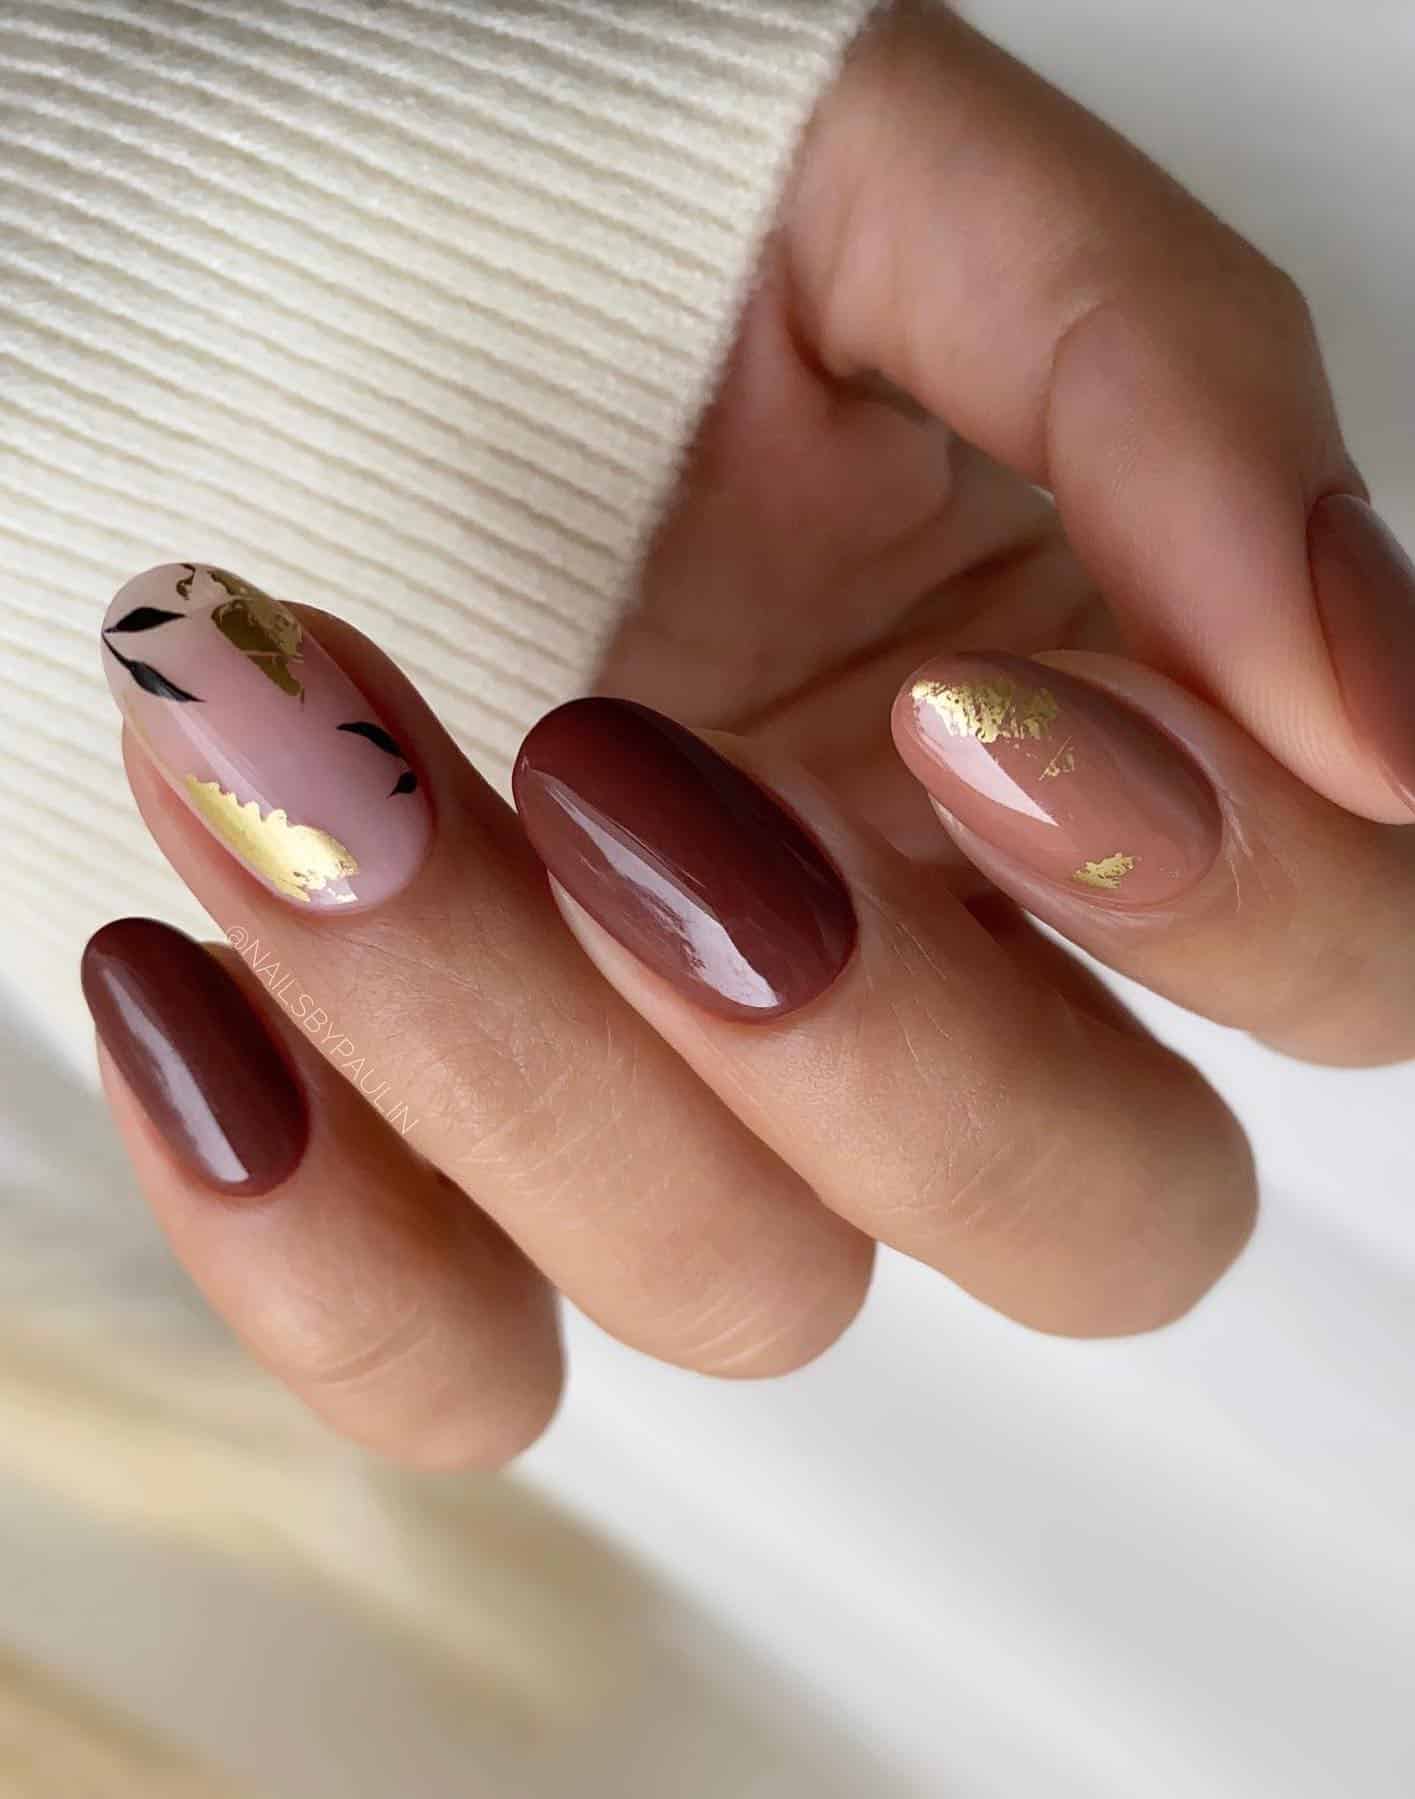 A hand with short round nails painted beige and brown with a nude accent nail with black leaf nail art and gold flake details